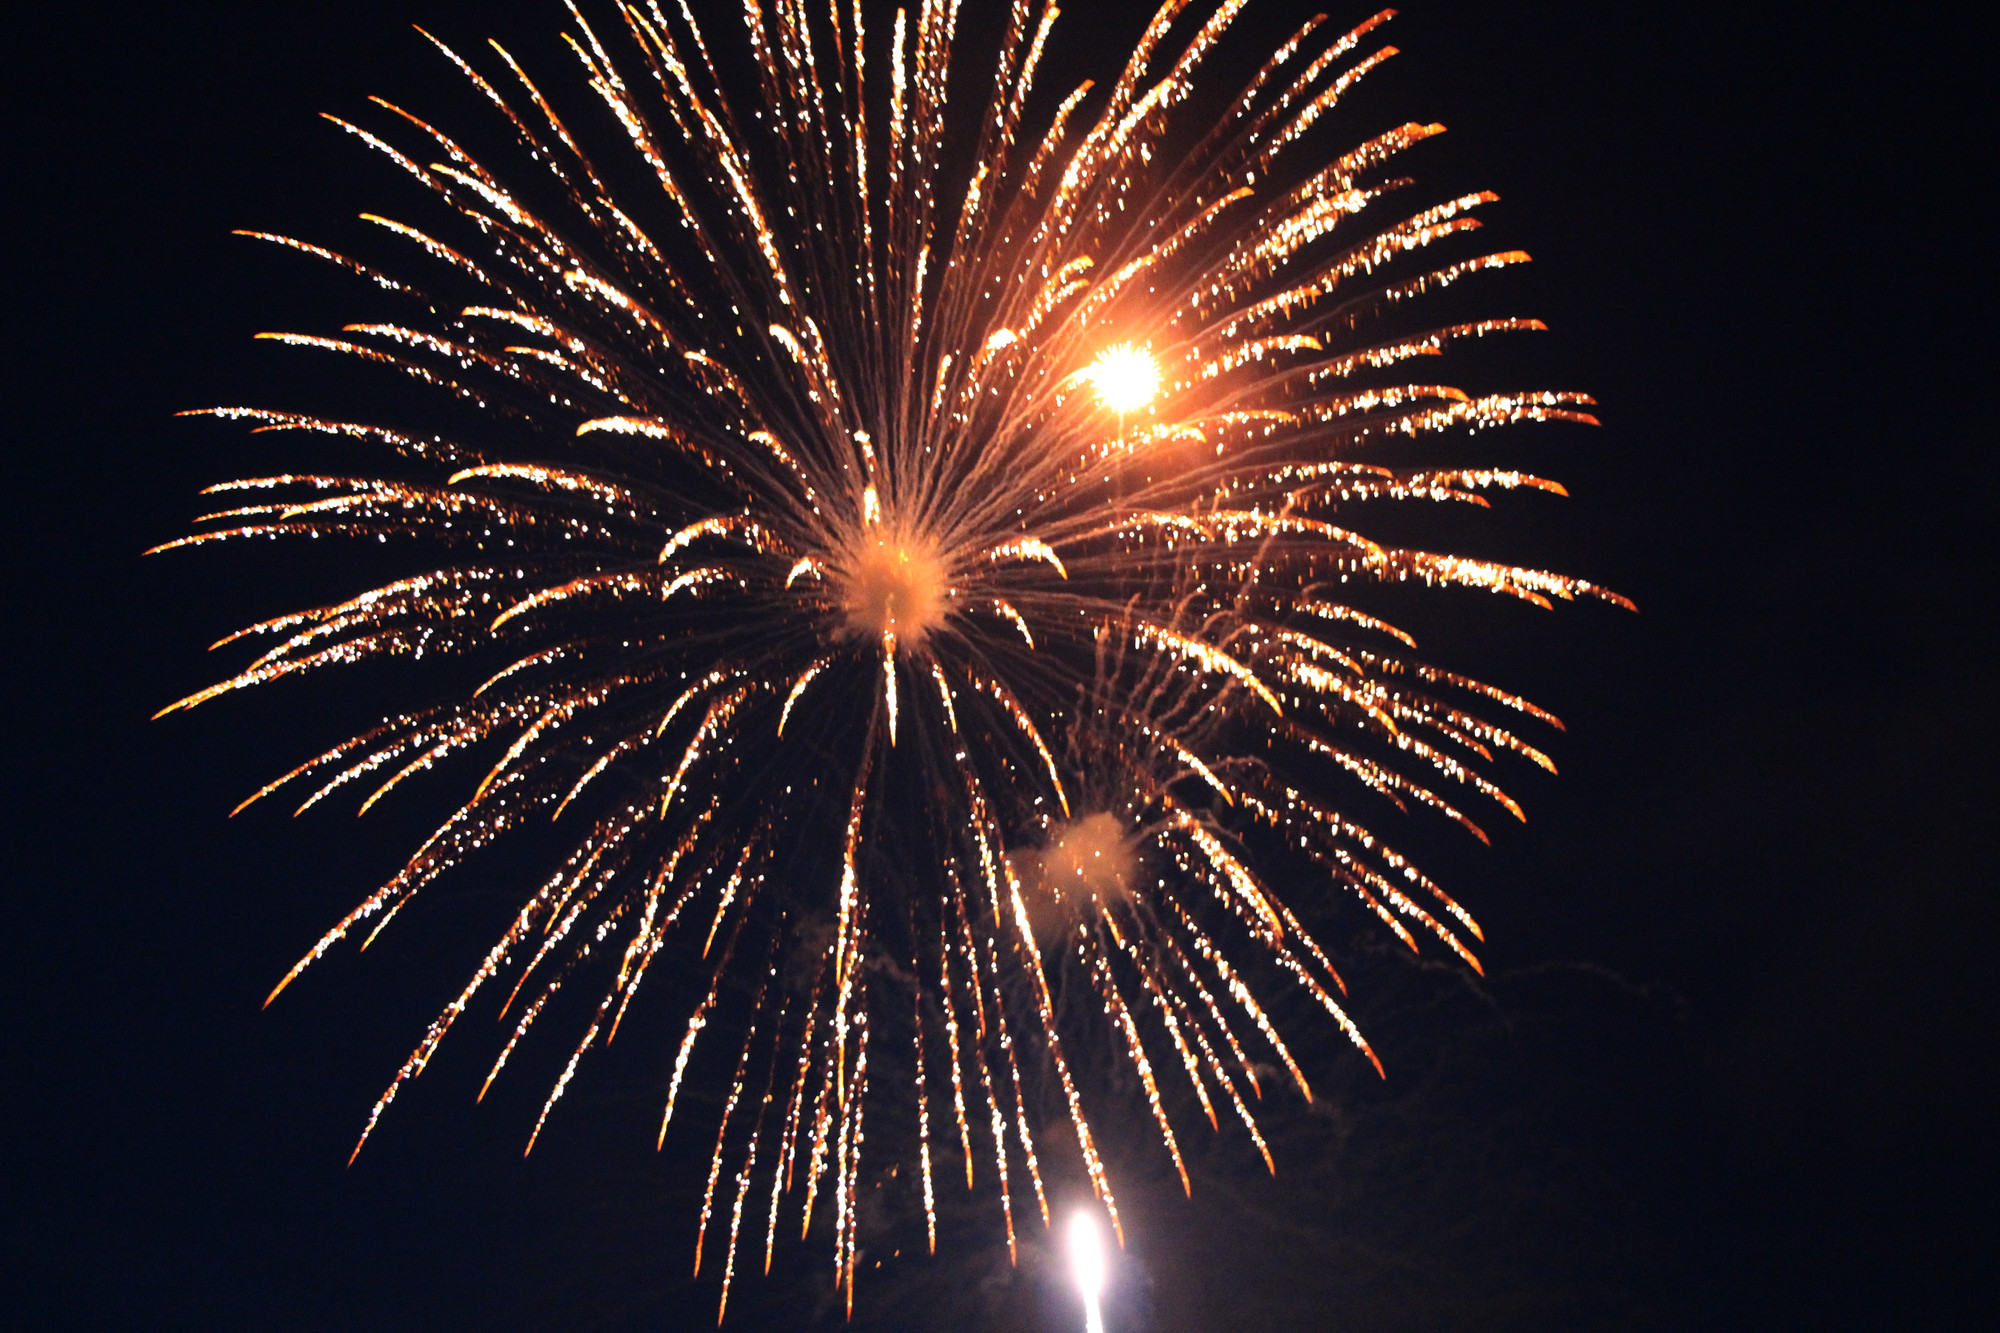 The Baldwin Chamber of Commerce firework show was a big hit. Many local businesses pitched in to make the event a reality.